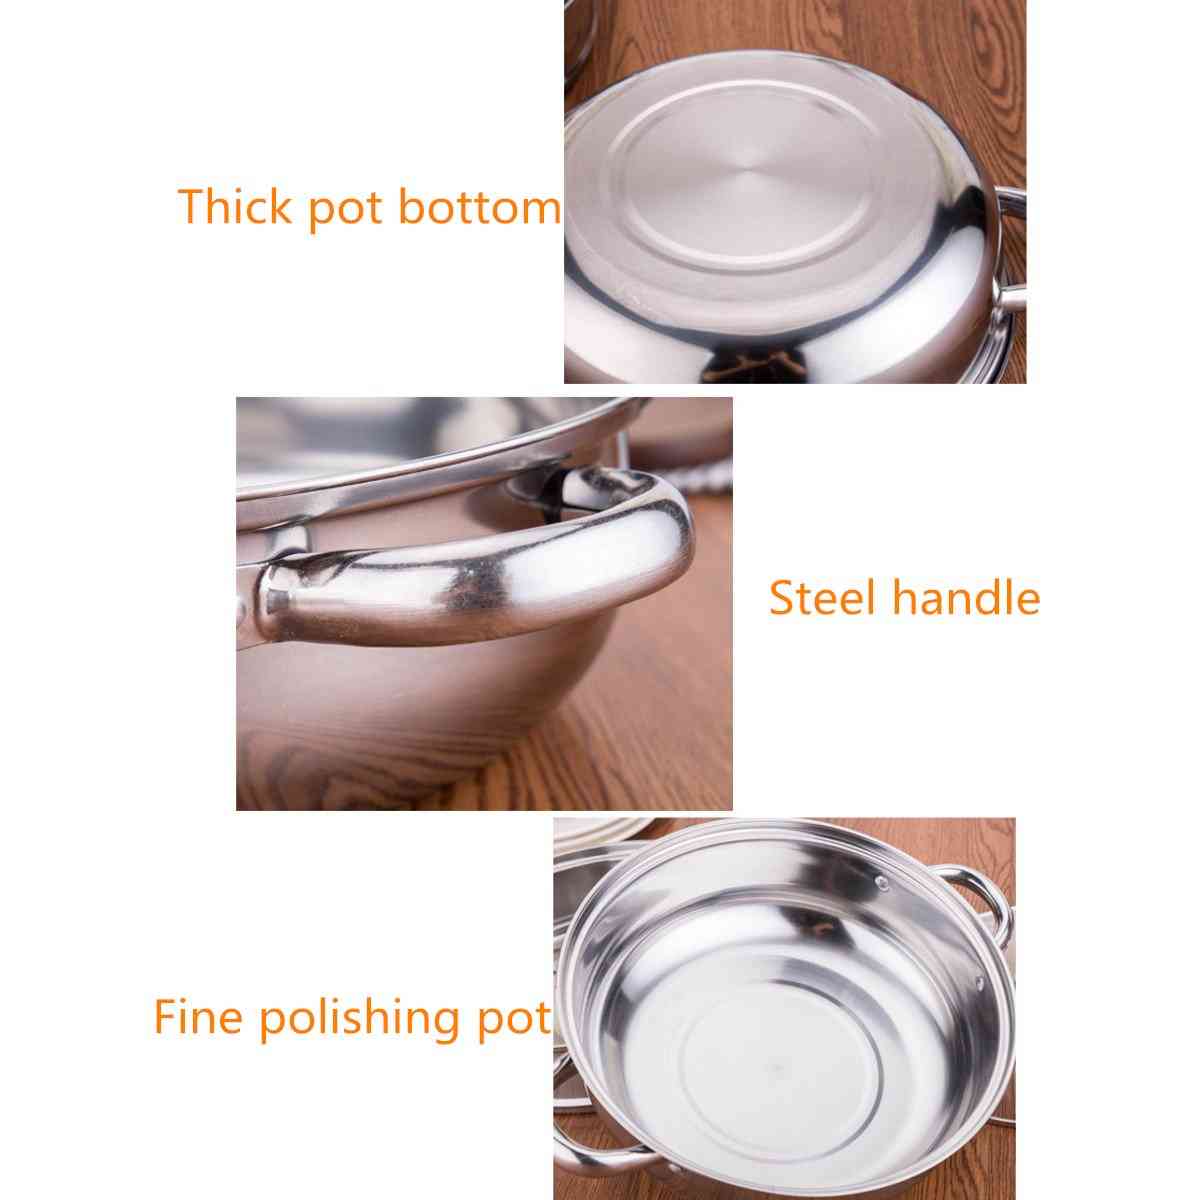  2 Tiers design and ergonomic handle for taking food easily. 